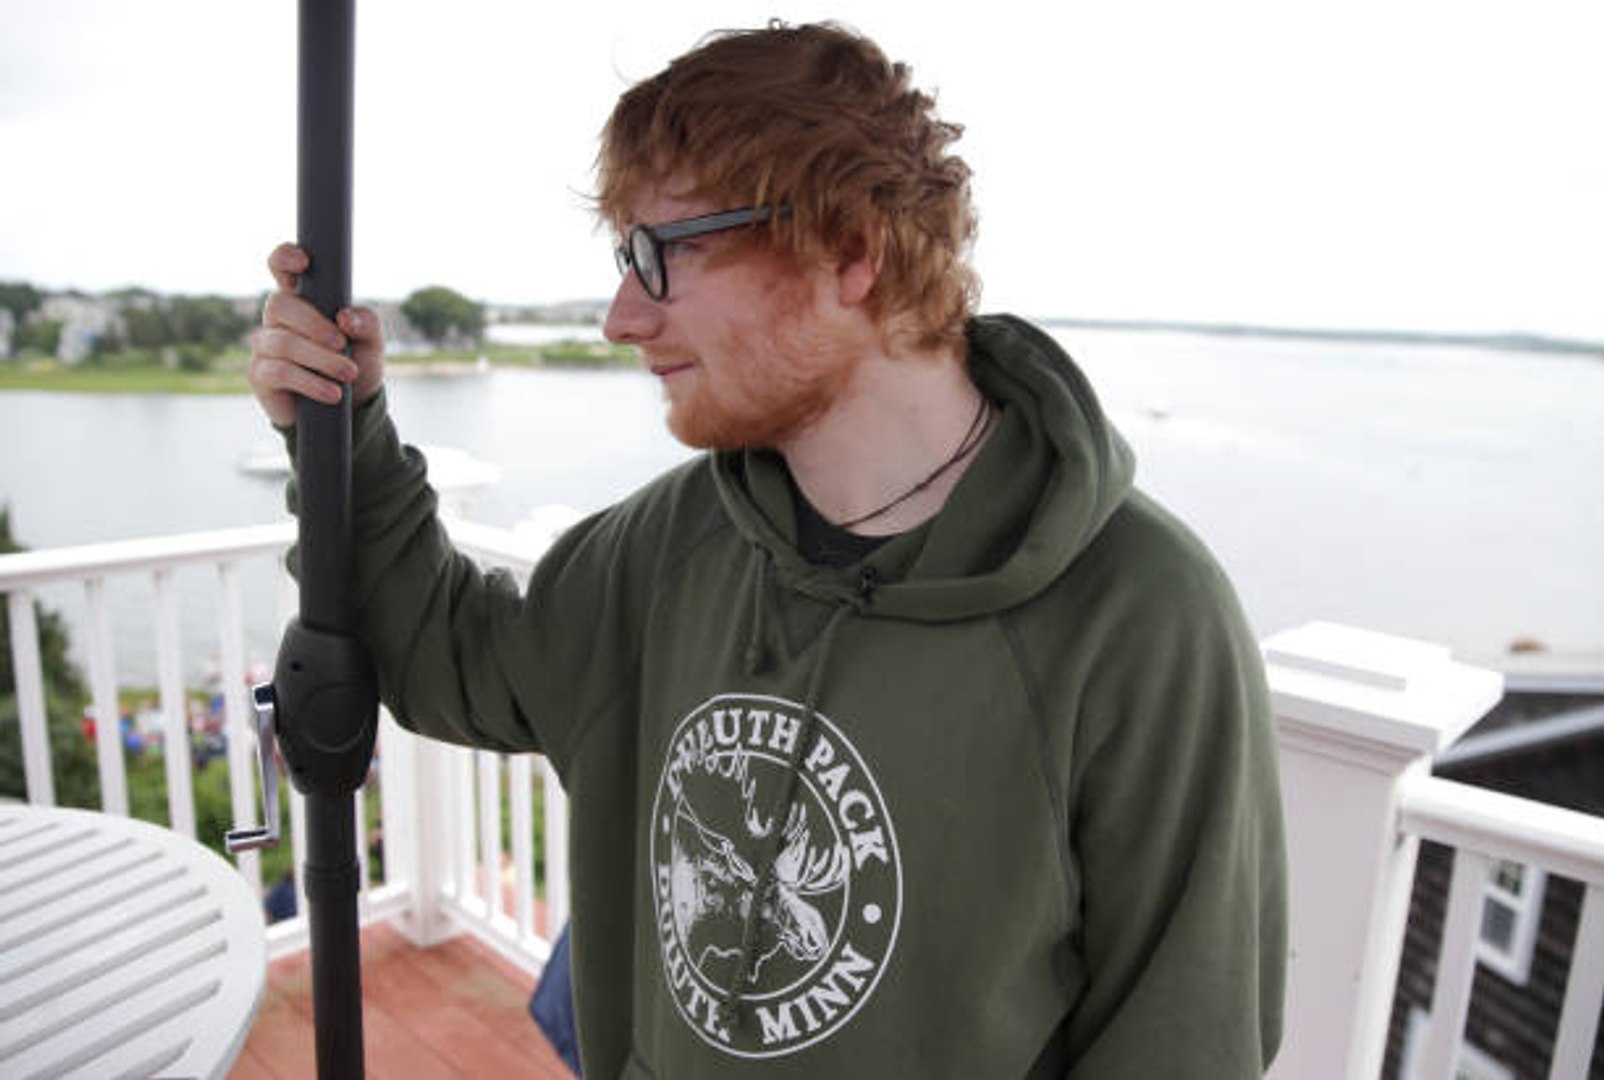 Game of Thrones criticism killed off Ed Sheeran's Twitter